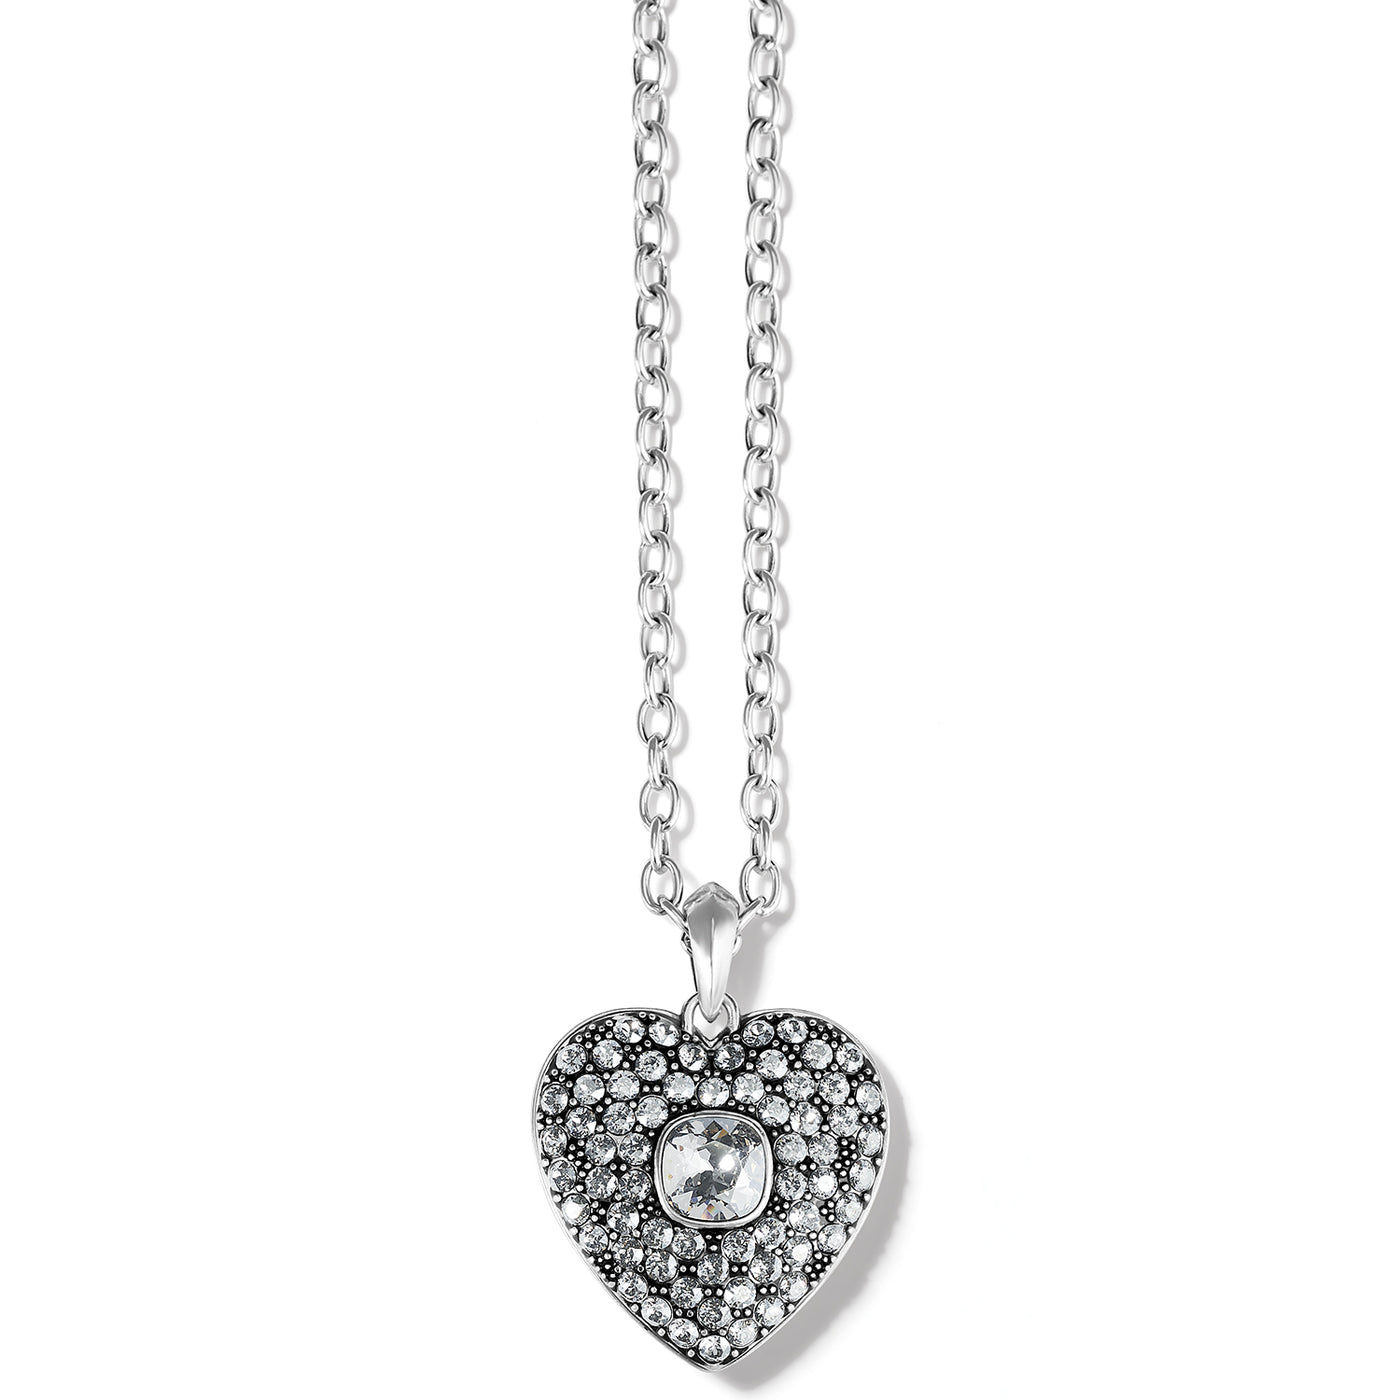 ADORE ME HEART KING NECKLACE